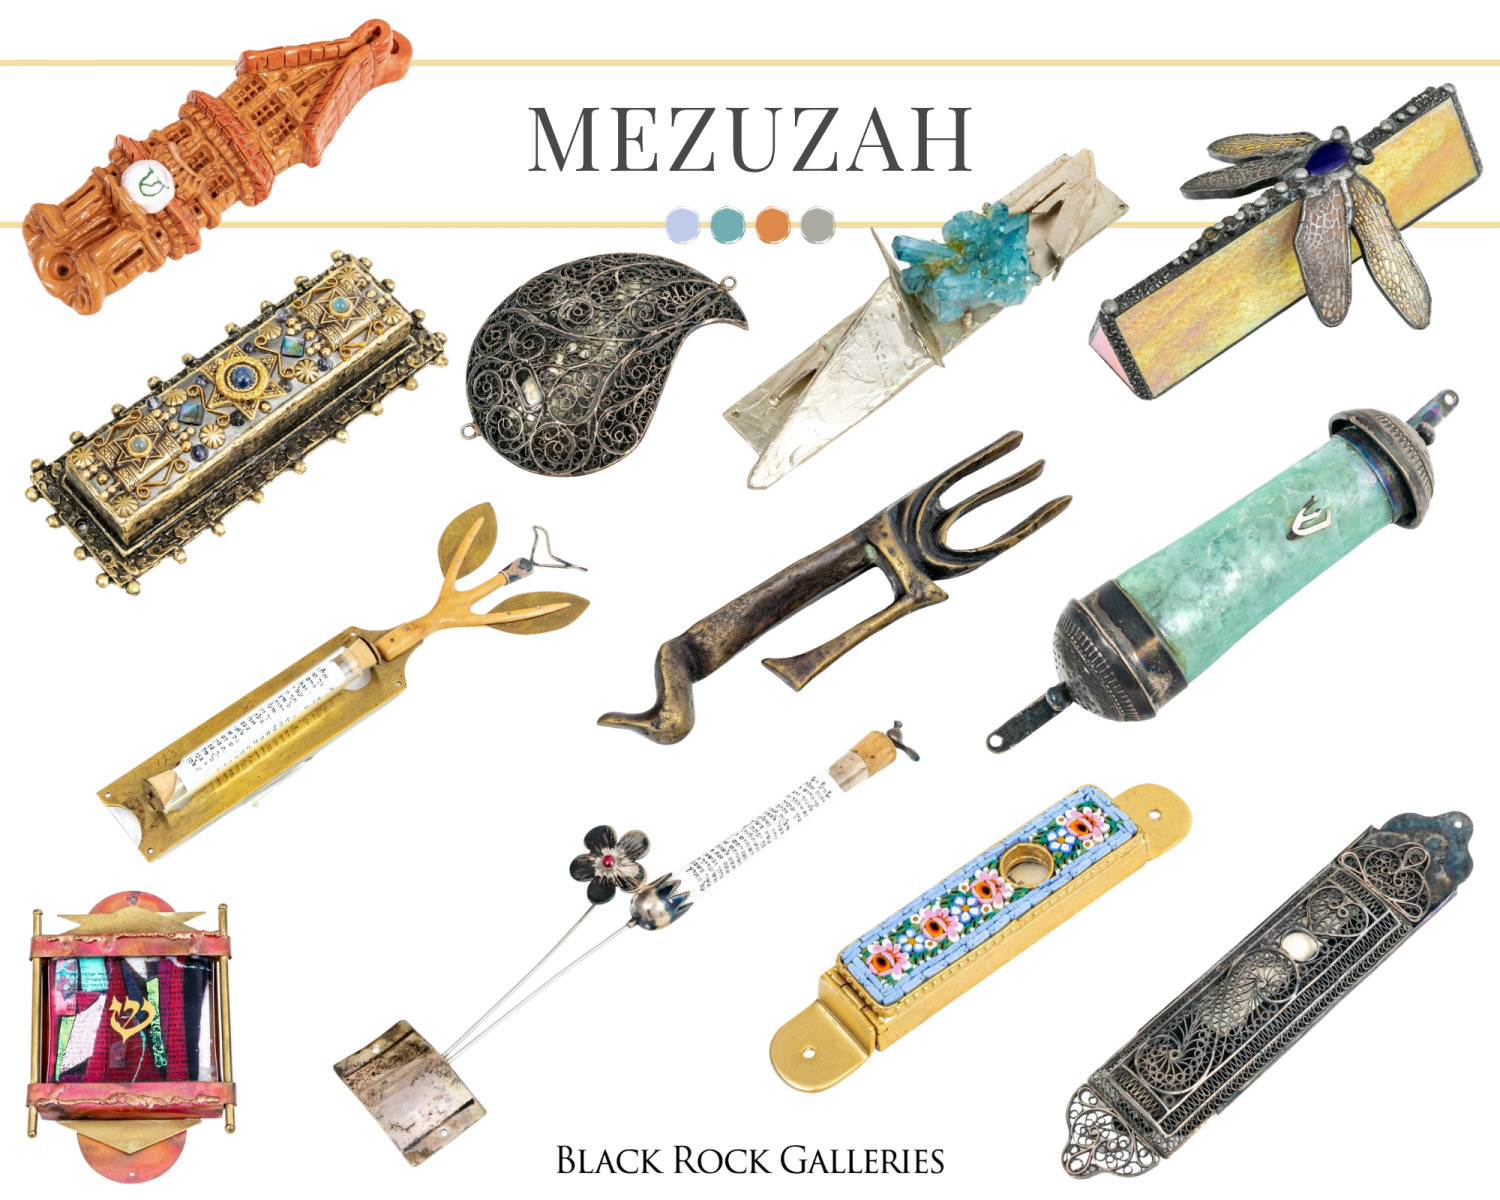 A collection of mezuzahs collected over decades from all over the world.